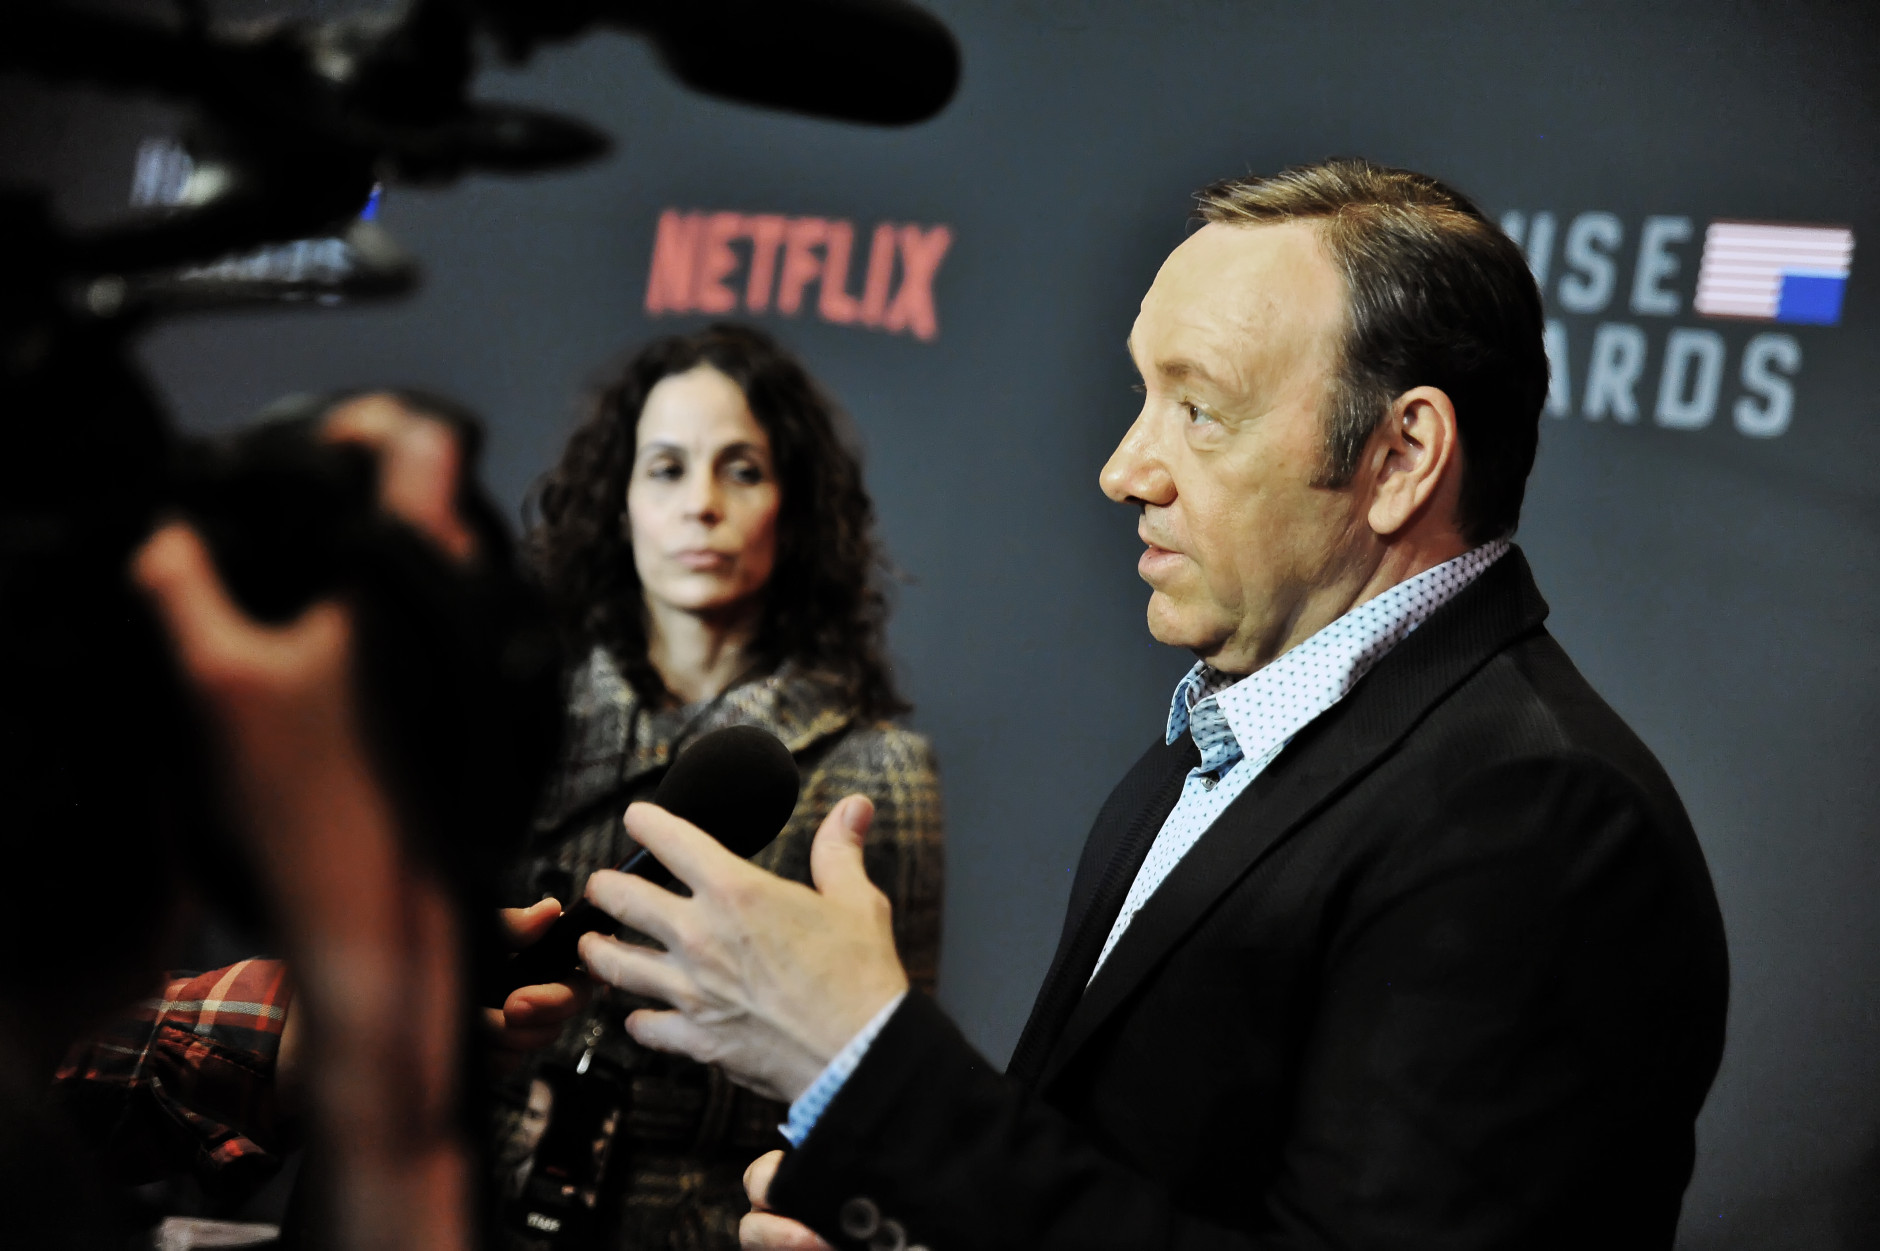  Kevin Spacey pictured answering questions on the red carpet on Feb. 22, 2016.  (Courtesy Shannon Finney, www.shannonfinneyphotography.com)